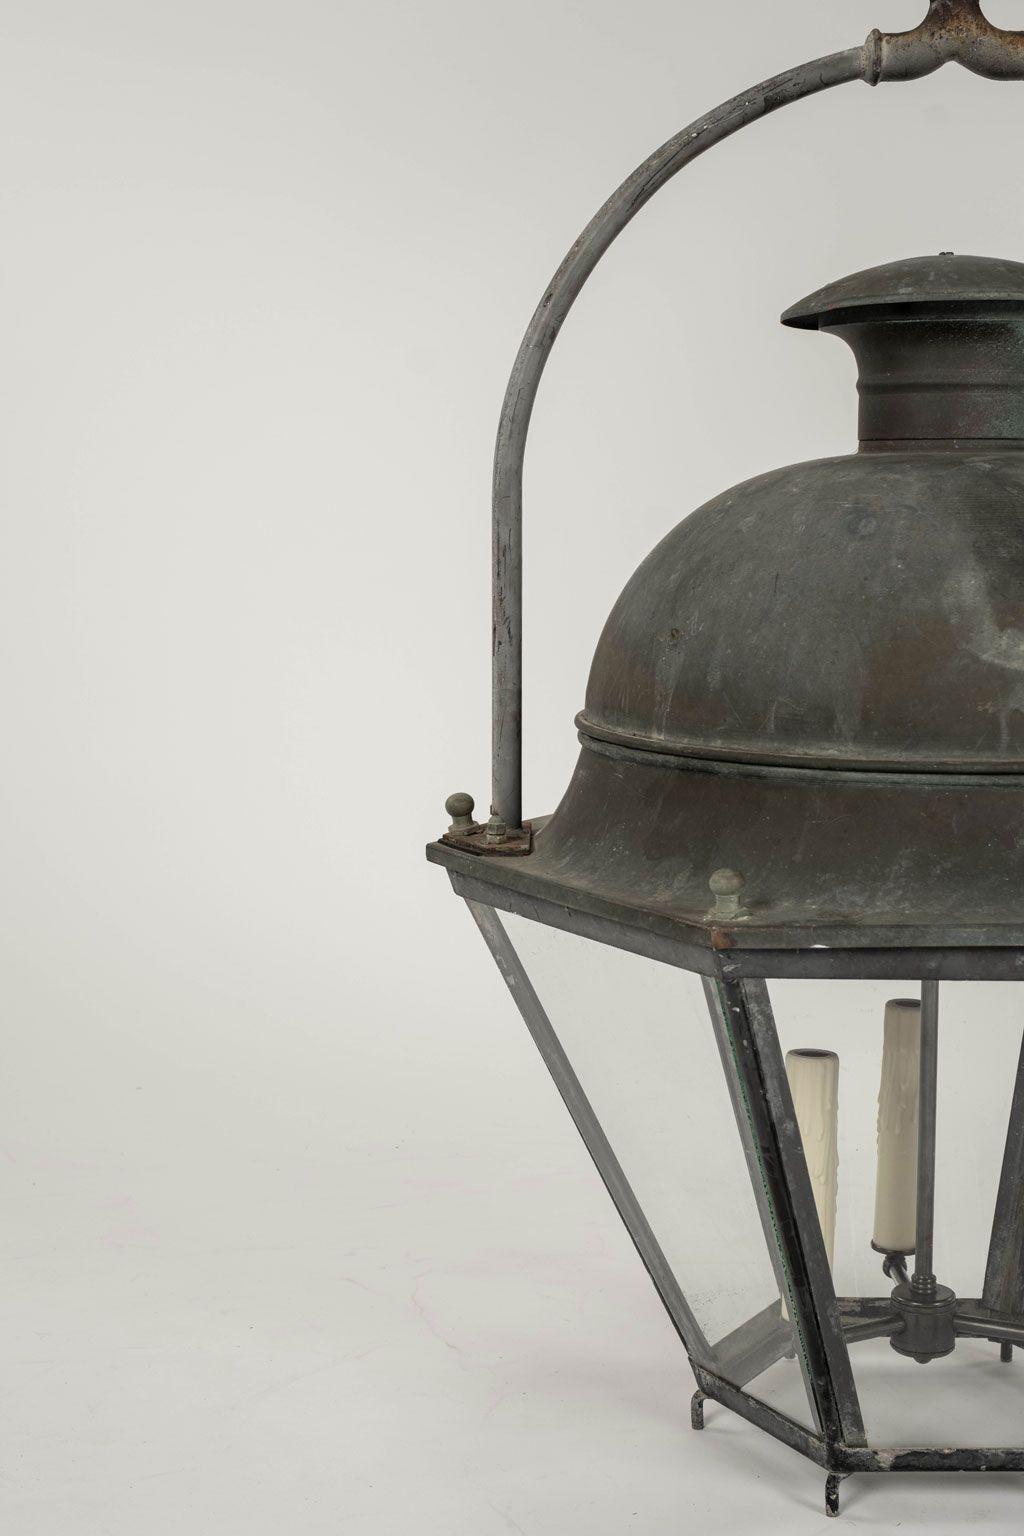 Domed hexagonal glass paneled iron and copper lantern, newly wired for use within the USA with drop cluster of three candelabra-size sockets. Lantern is from the South of France and dates to about the middle of 20th century. Includes four feet of